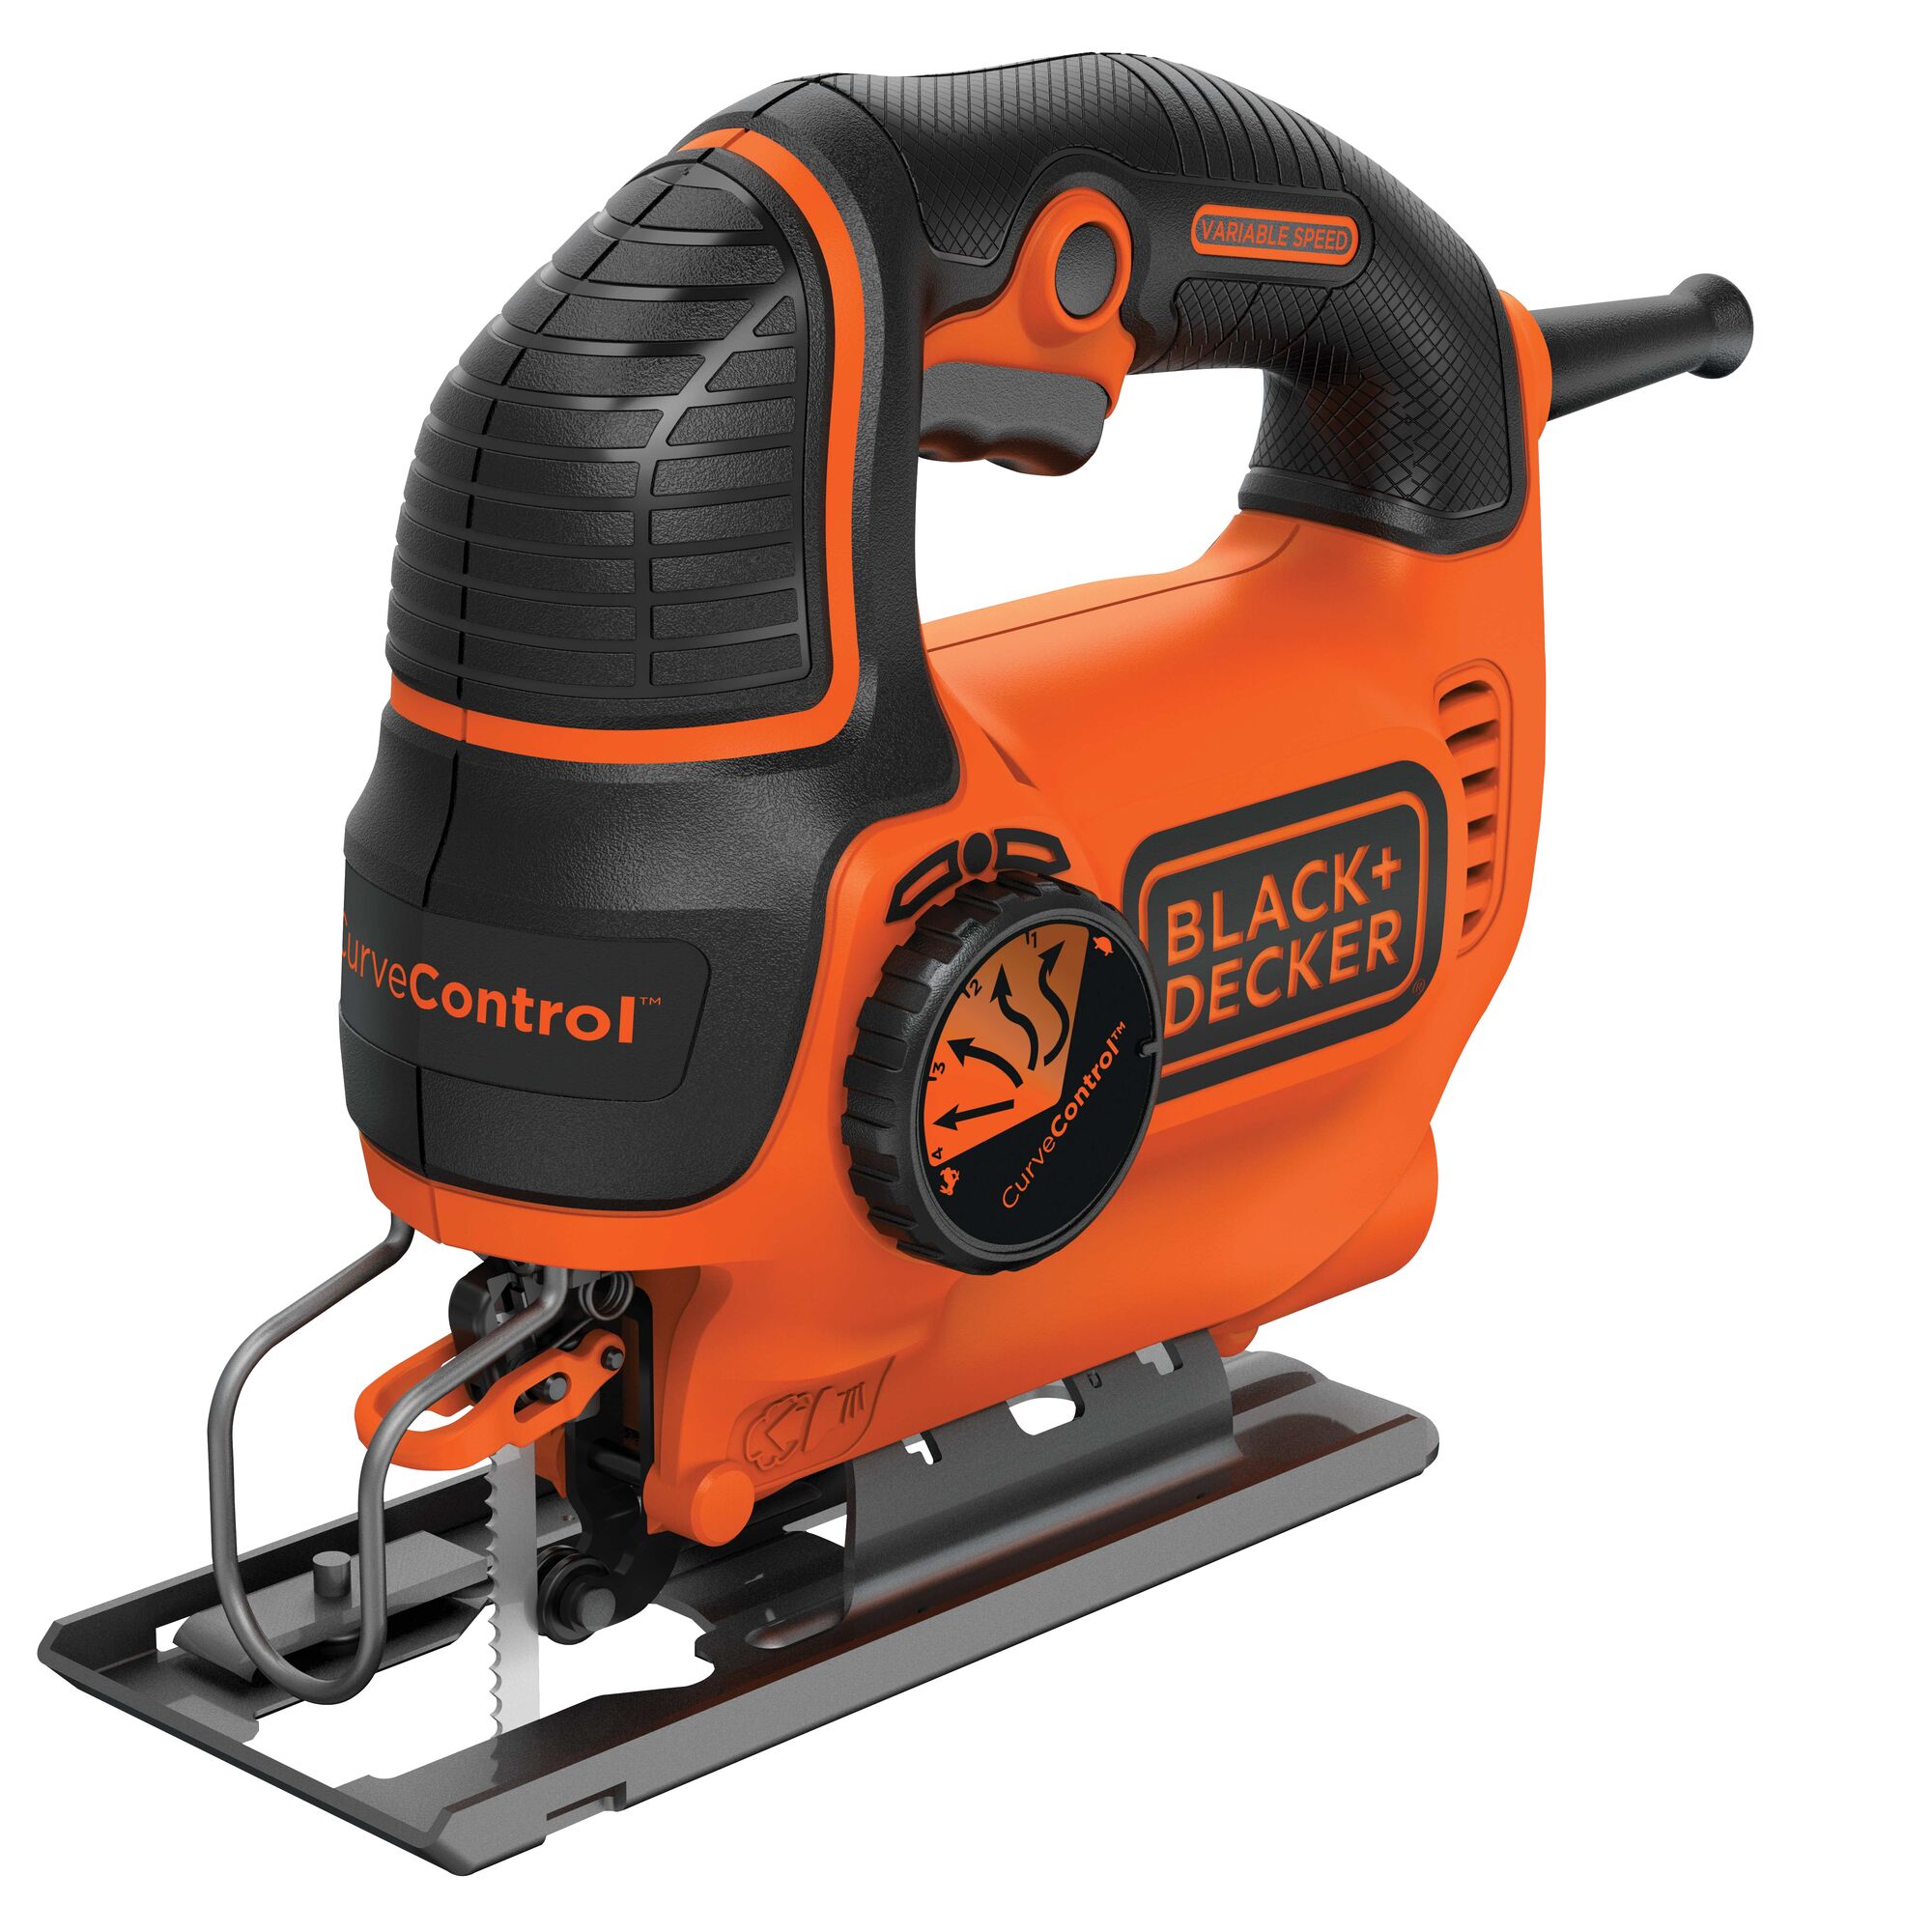 Profile of black and decker jig saw smart select .